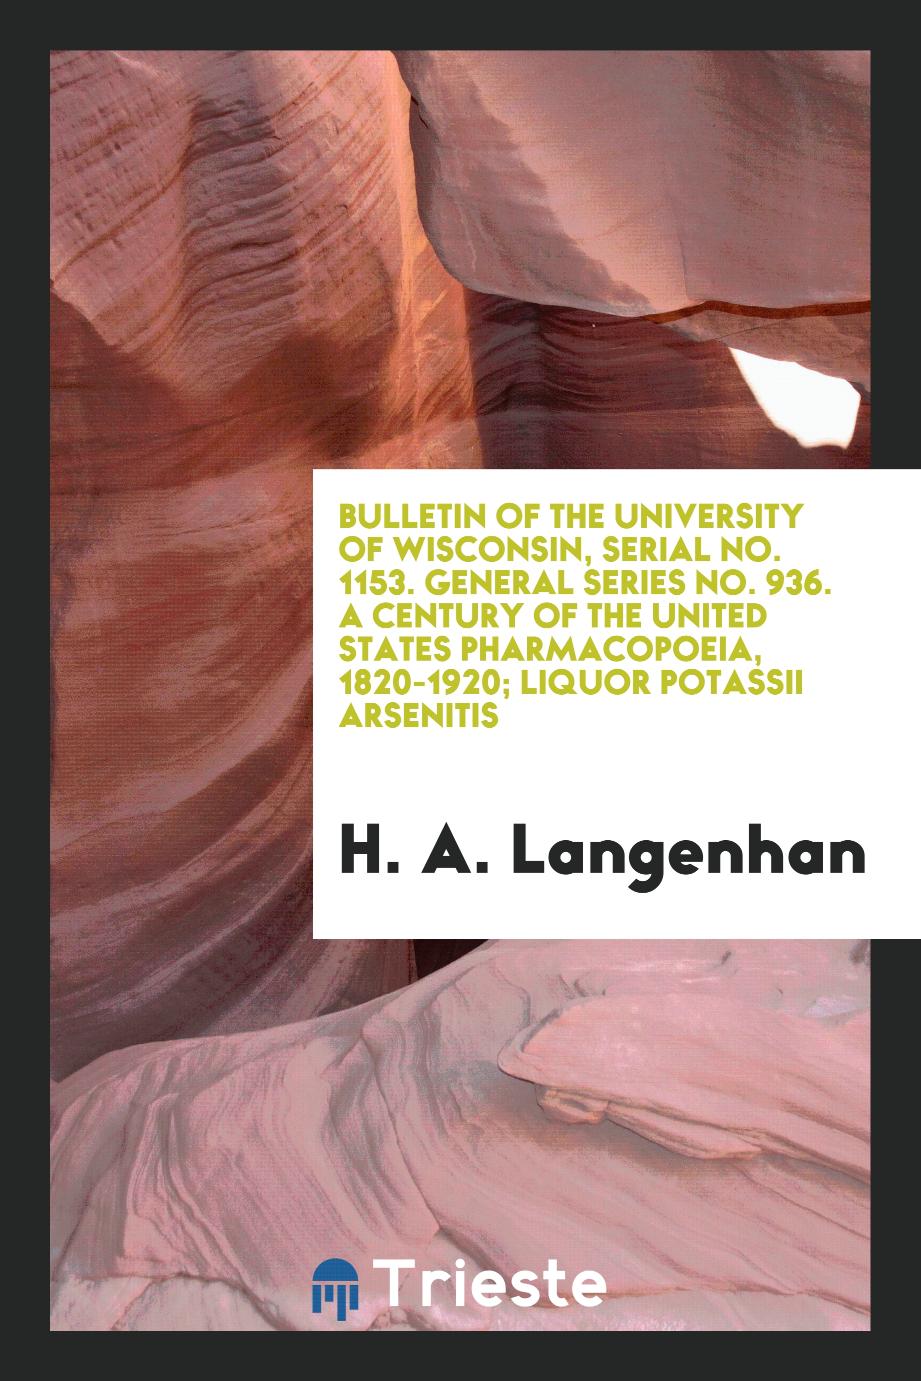 Bulletin of the University of Wisconsin, Serial No. 1153. General Series No. 936. A Century of the United States Pharmacopoeia, 1820-1920; Liquor Potassii Arsenitis